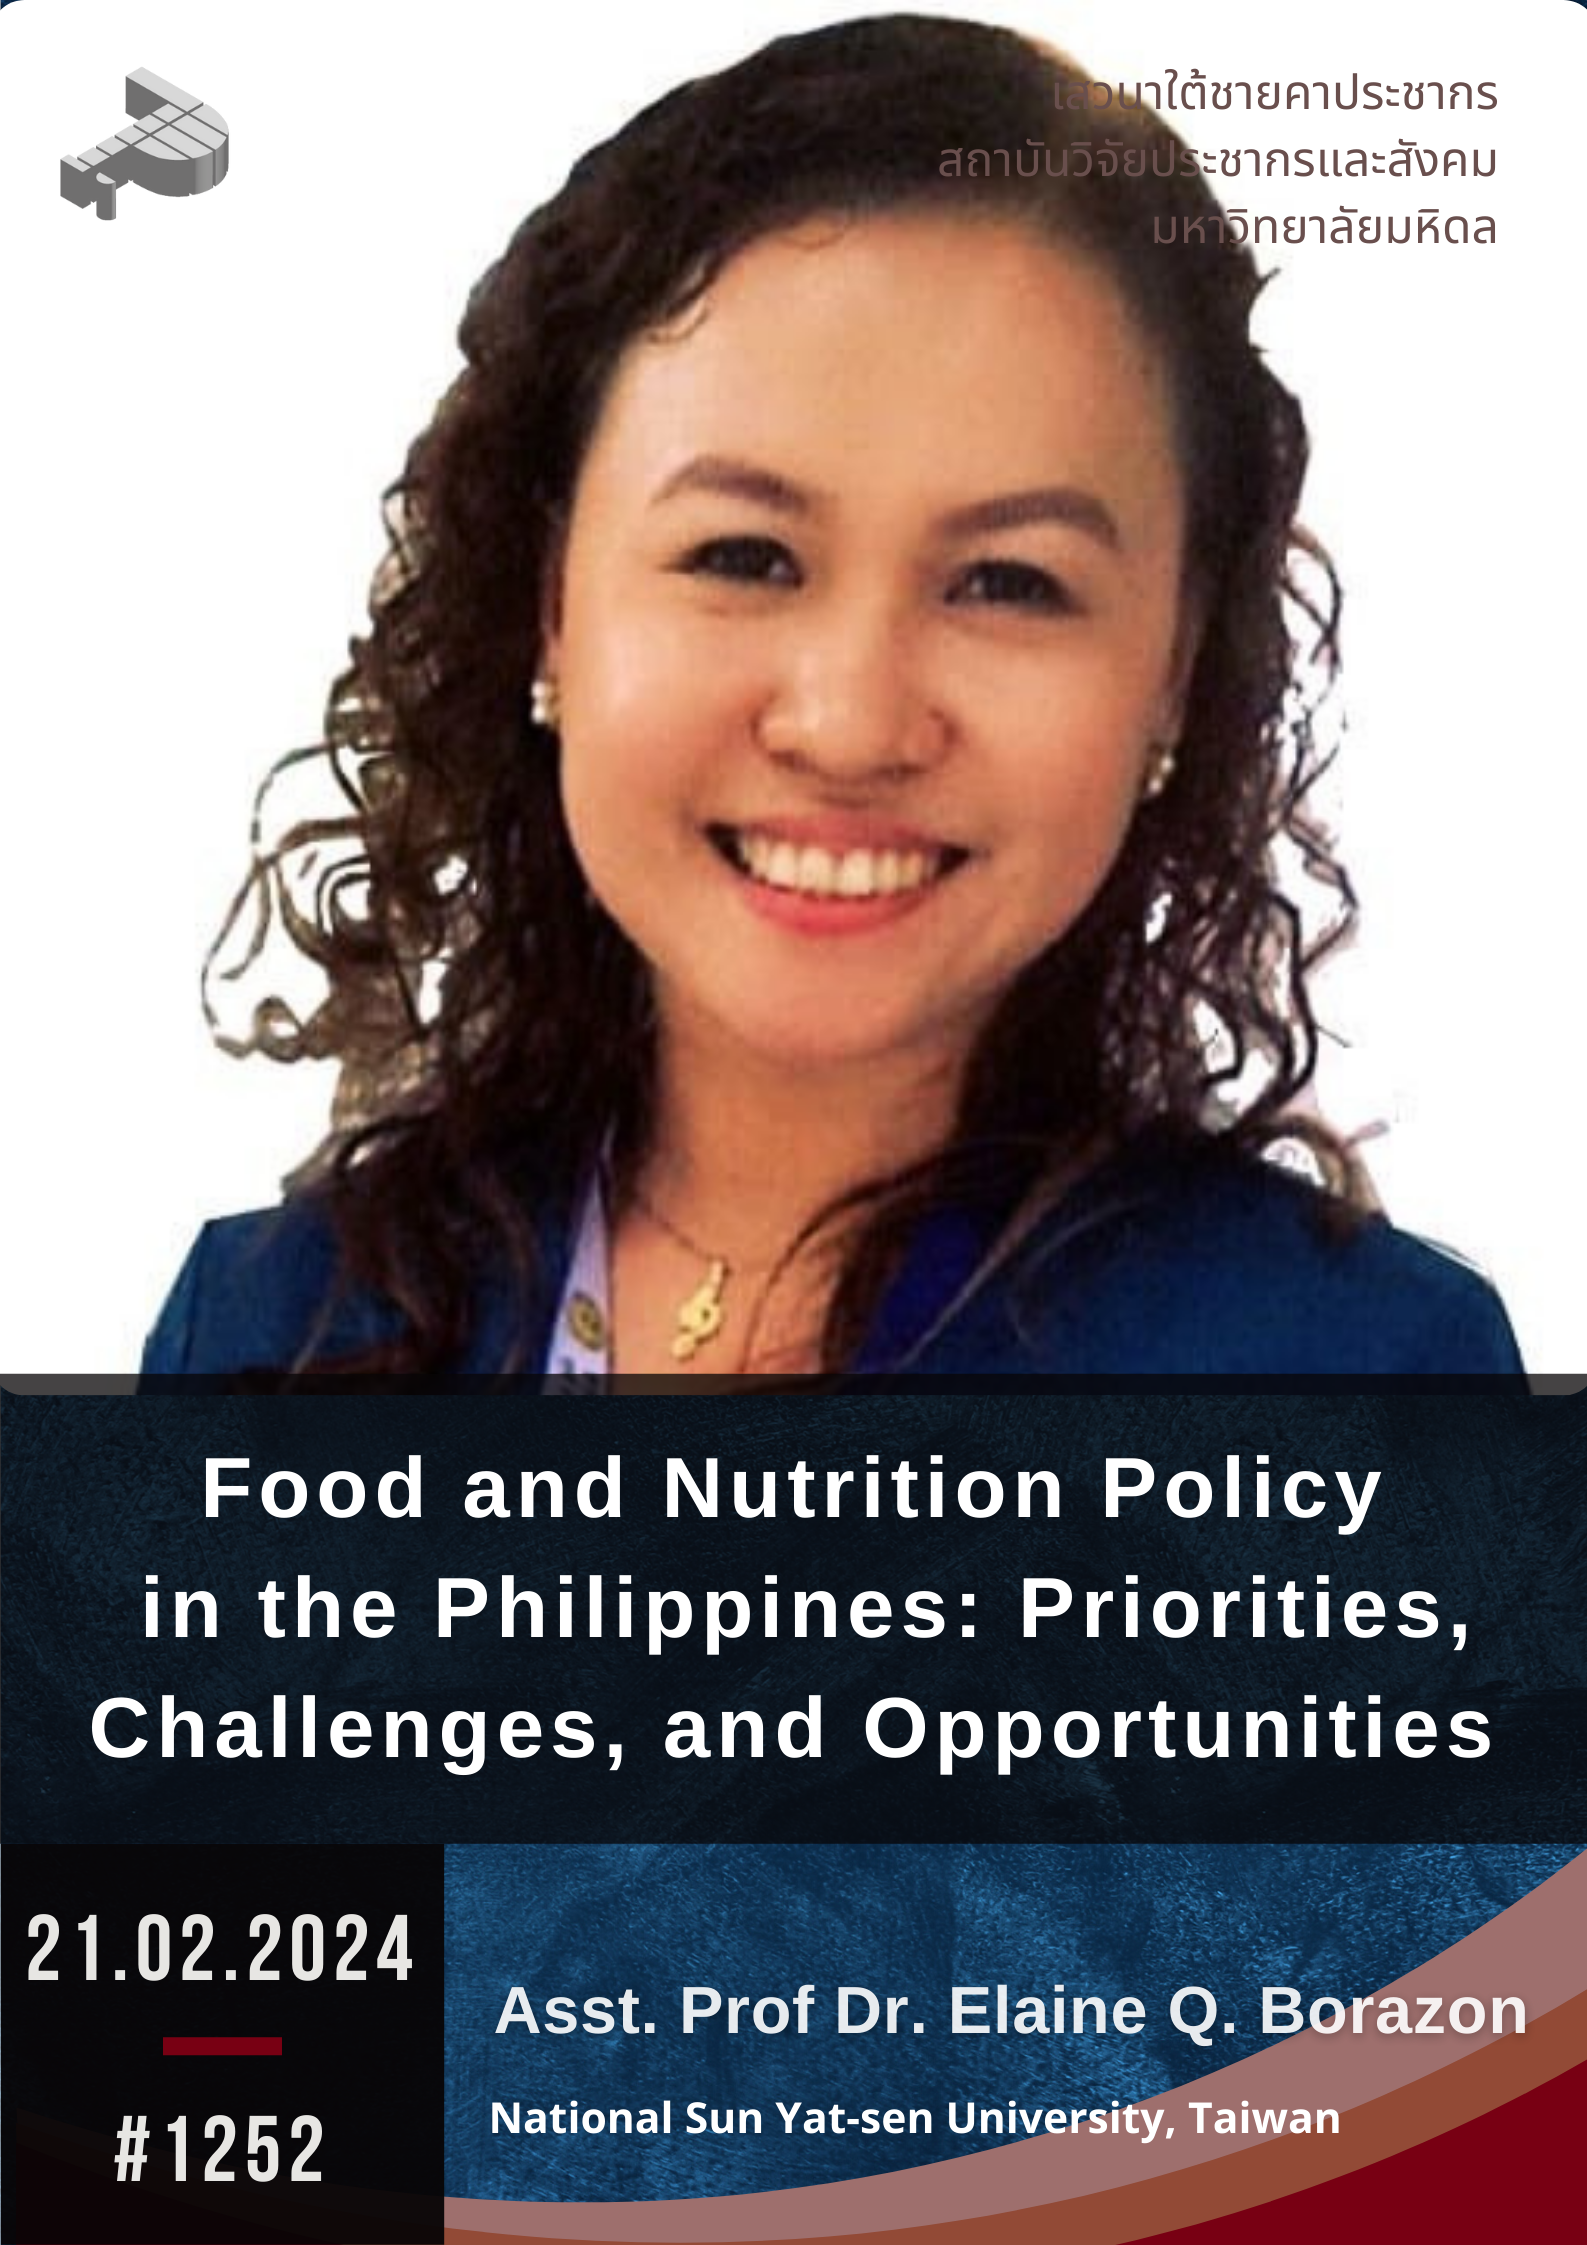 Food and Nutrition Policy in the Philippines: Priorities, Challenges, and Opportunities